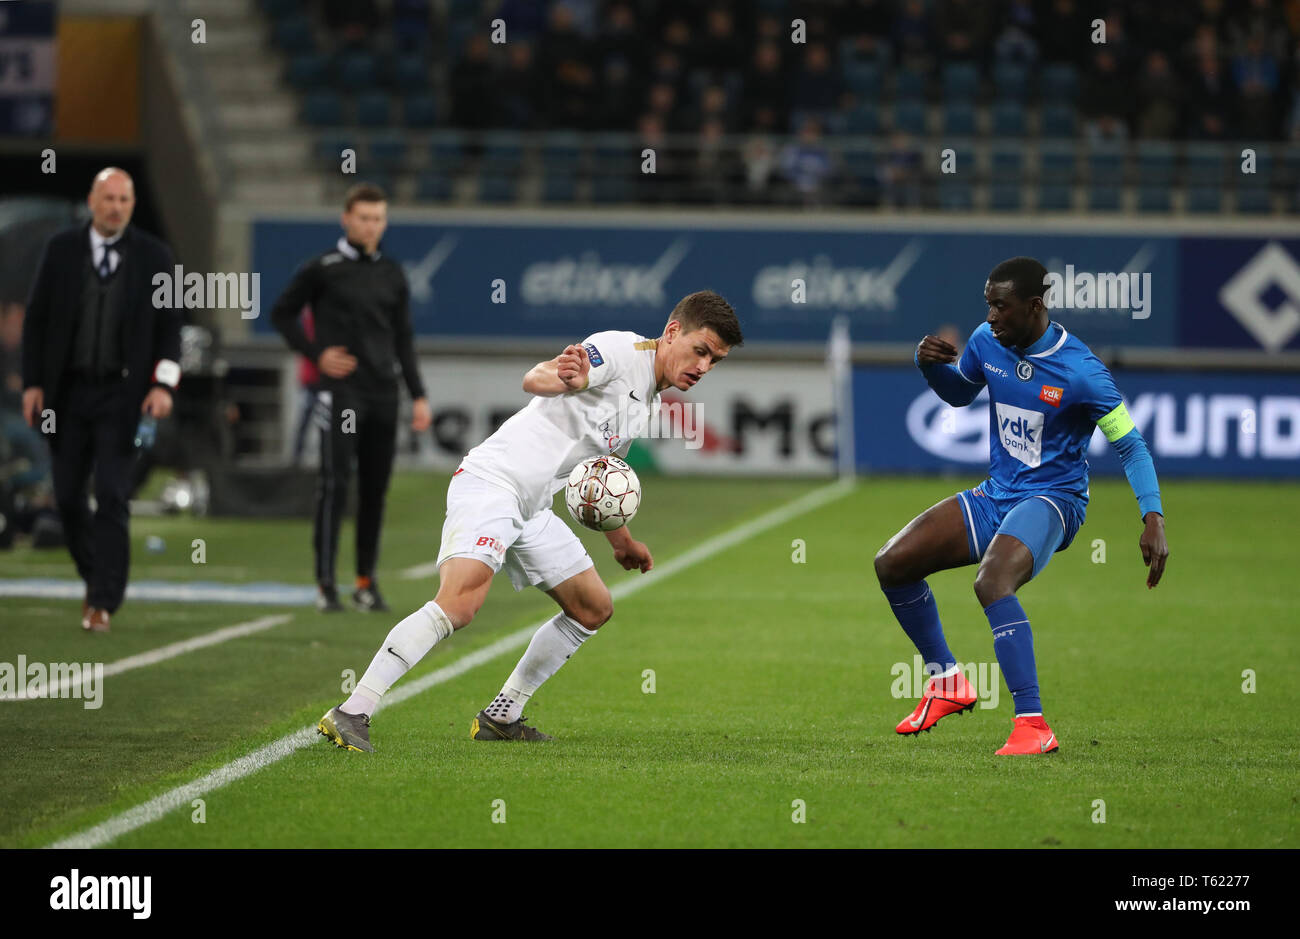 Gent, Belgium. 28th Apr, 2019. GENT, BELGIUM - APRIL 27: Joakim Maehle of Genk and Nana Asare of Kaa Gent fight for the ball during the Jupiler Pro League play-off 1 match (day 6) between Kaa Gent and Krc Genk on April 27, 2019 in Gent, Belgium. (Photo by Vincent Van Doornick/Isosport) Credit: Pro Shots/Alamy Live News Stock Photo